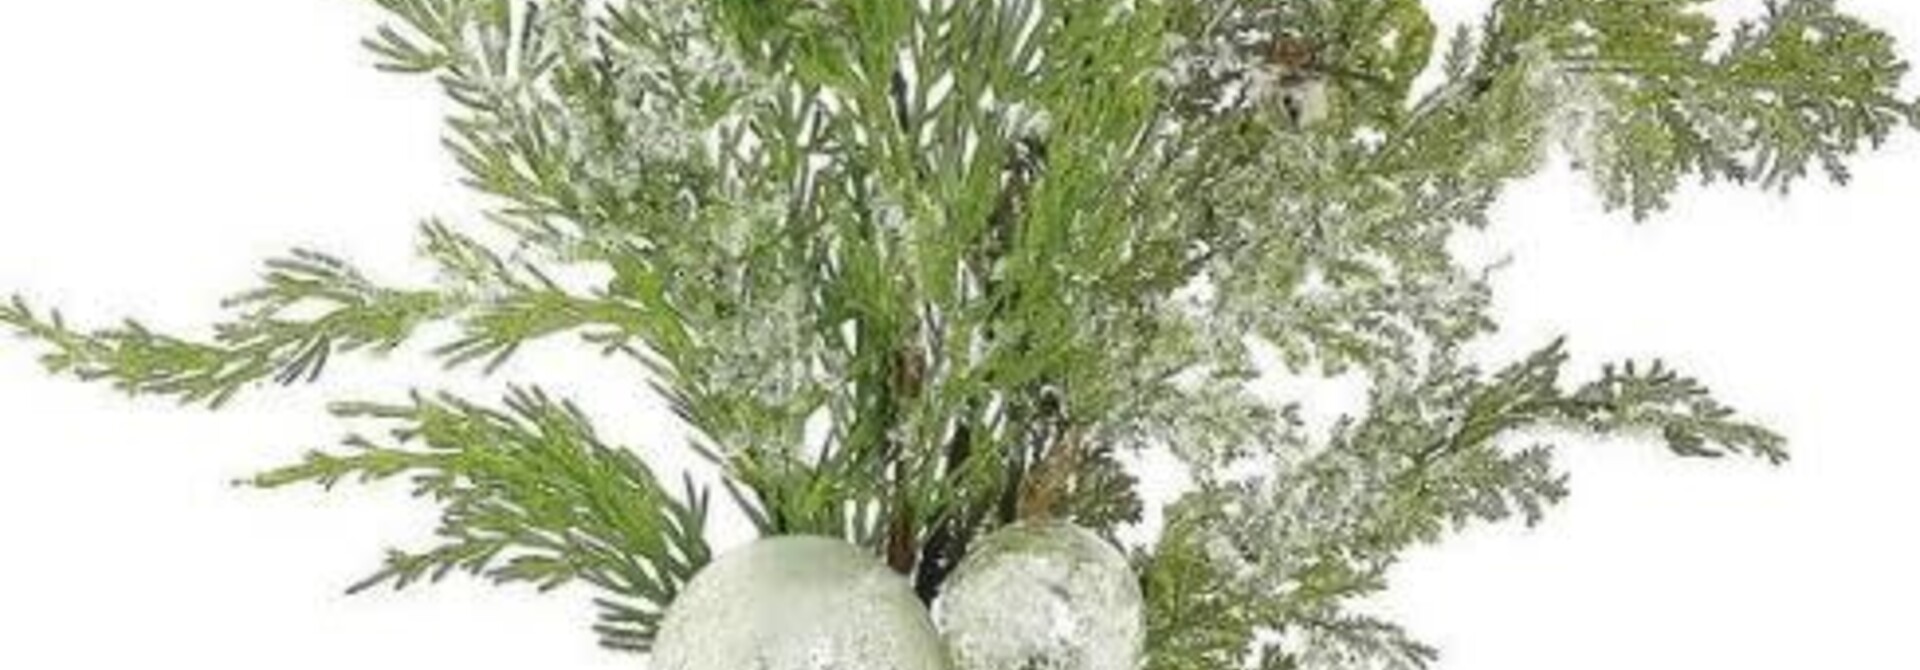 Shimmer Ornament | The Holiday Floral Collection, Cedar & Ice Spray - 22 Inch